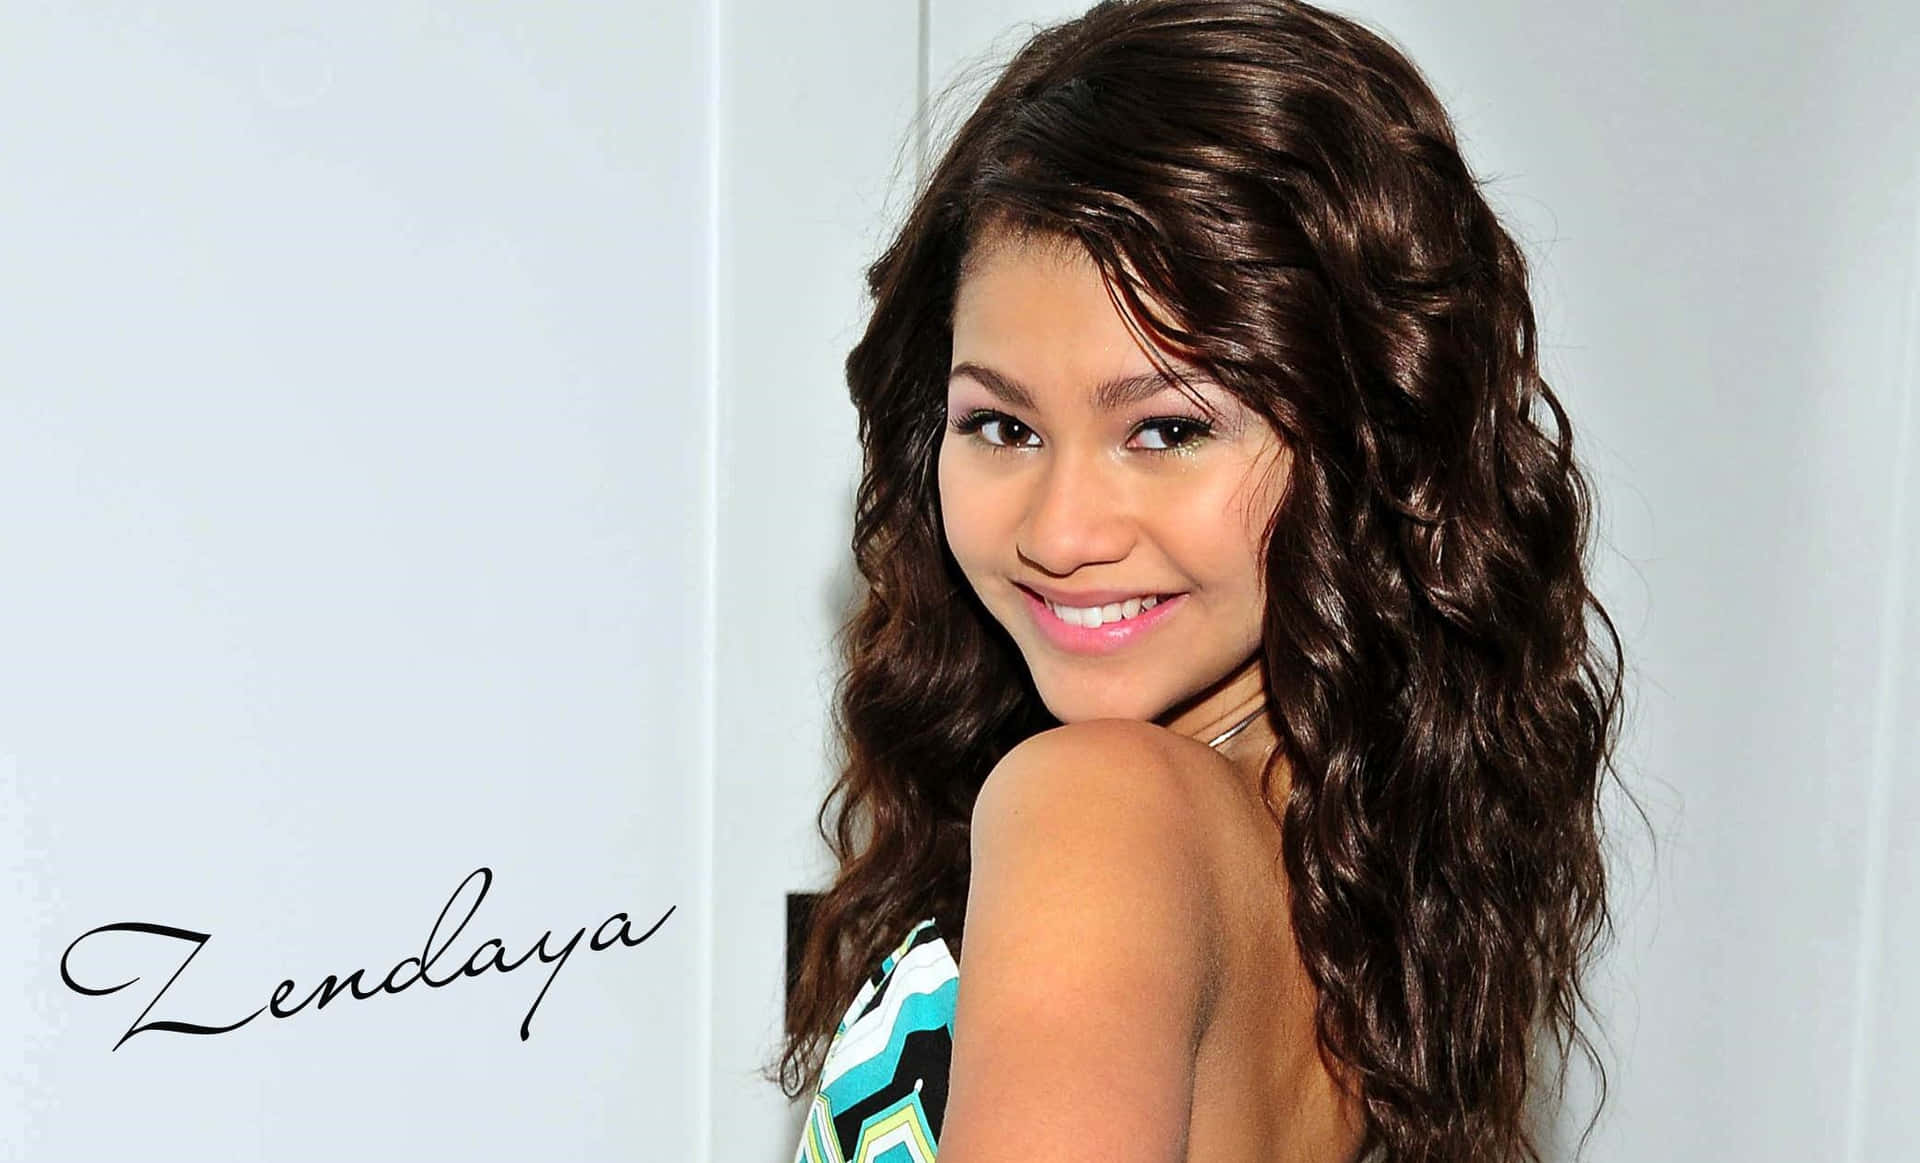 Download Actress and Singer Zendaya poses for the camera | Wallpapers.com